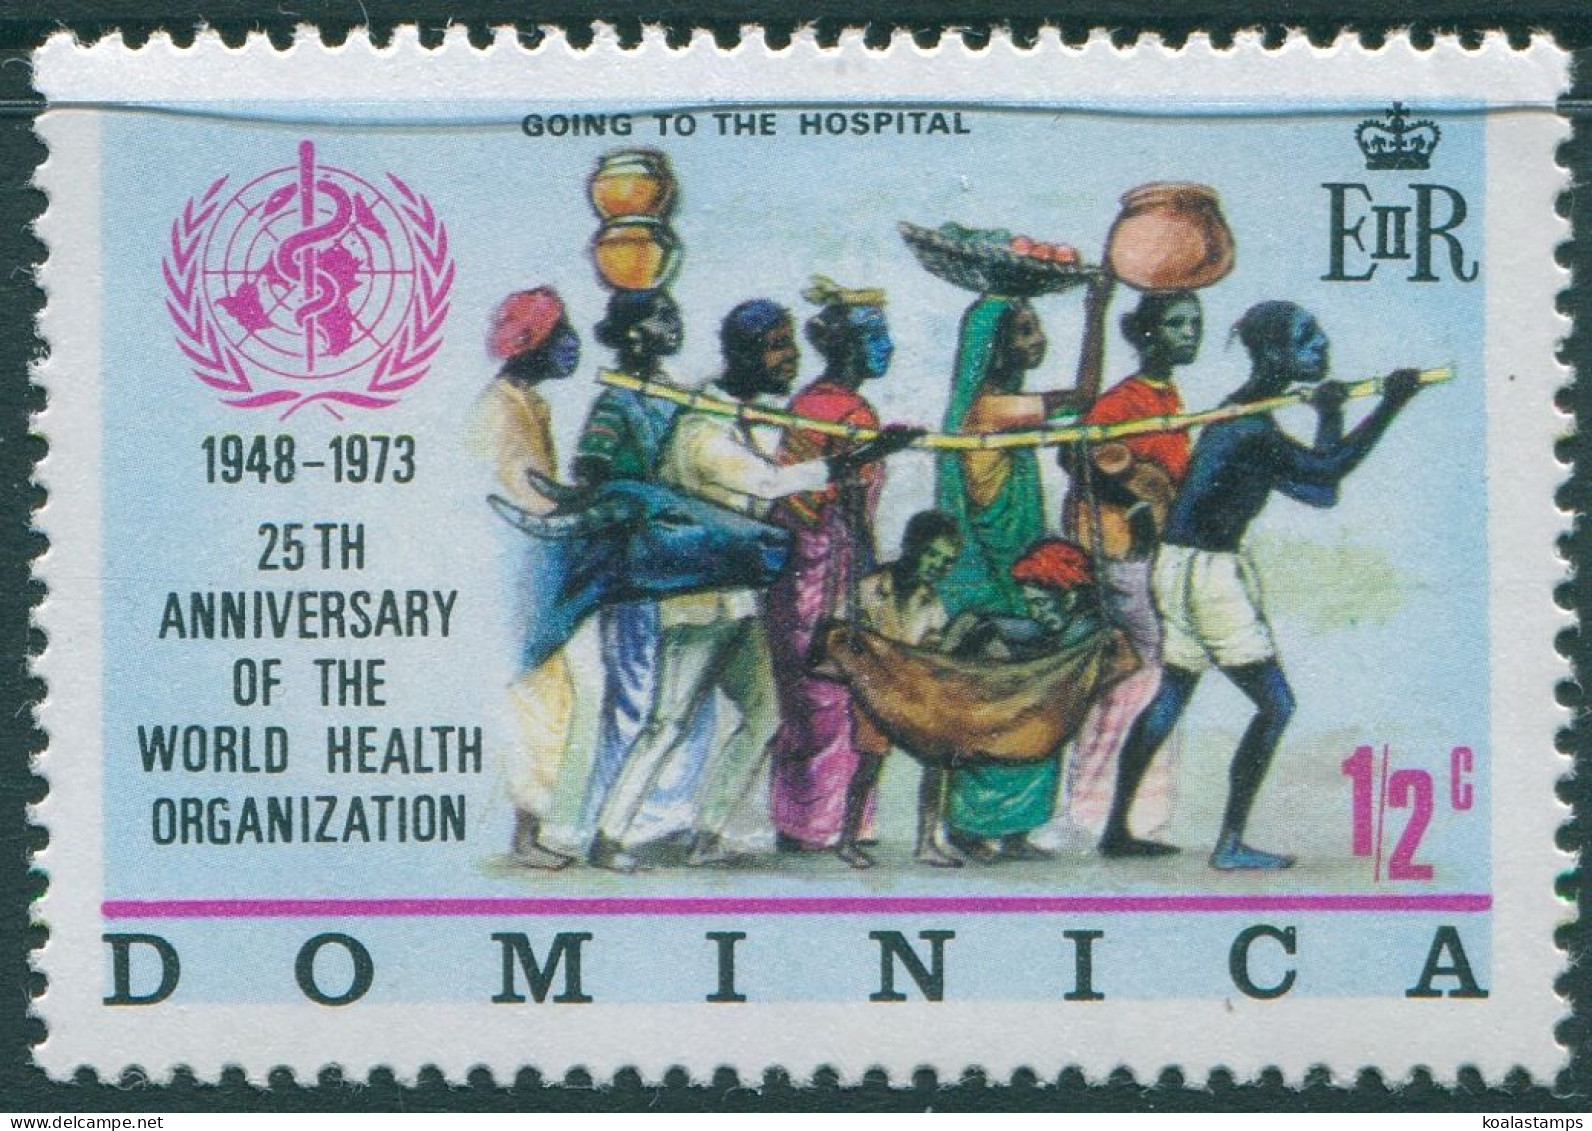 Dominica 1973 SG381 ½c Going To Hospital MLH - Dominica (1978-...)